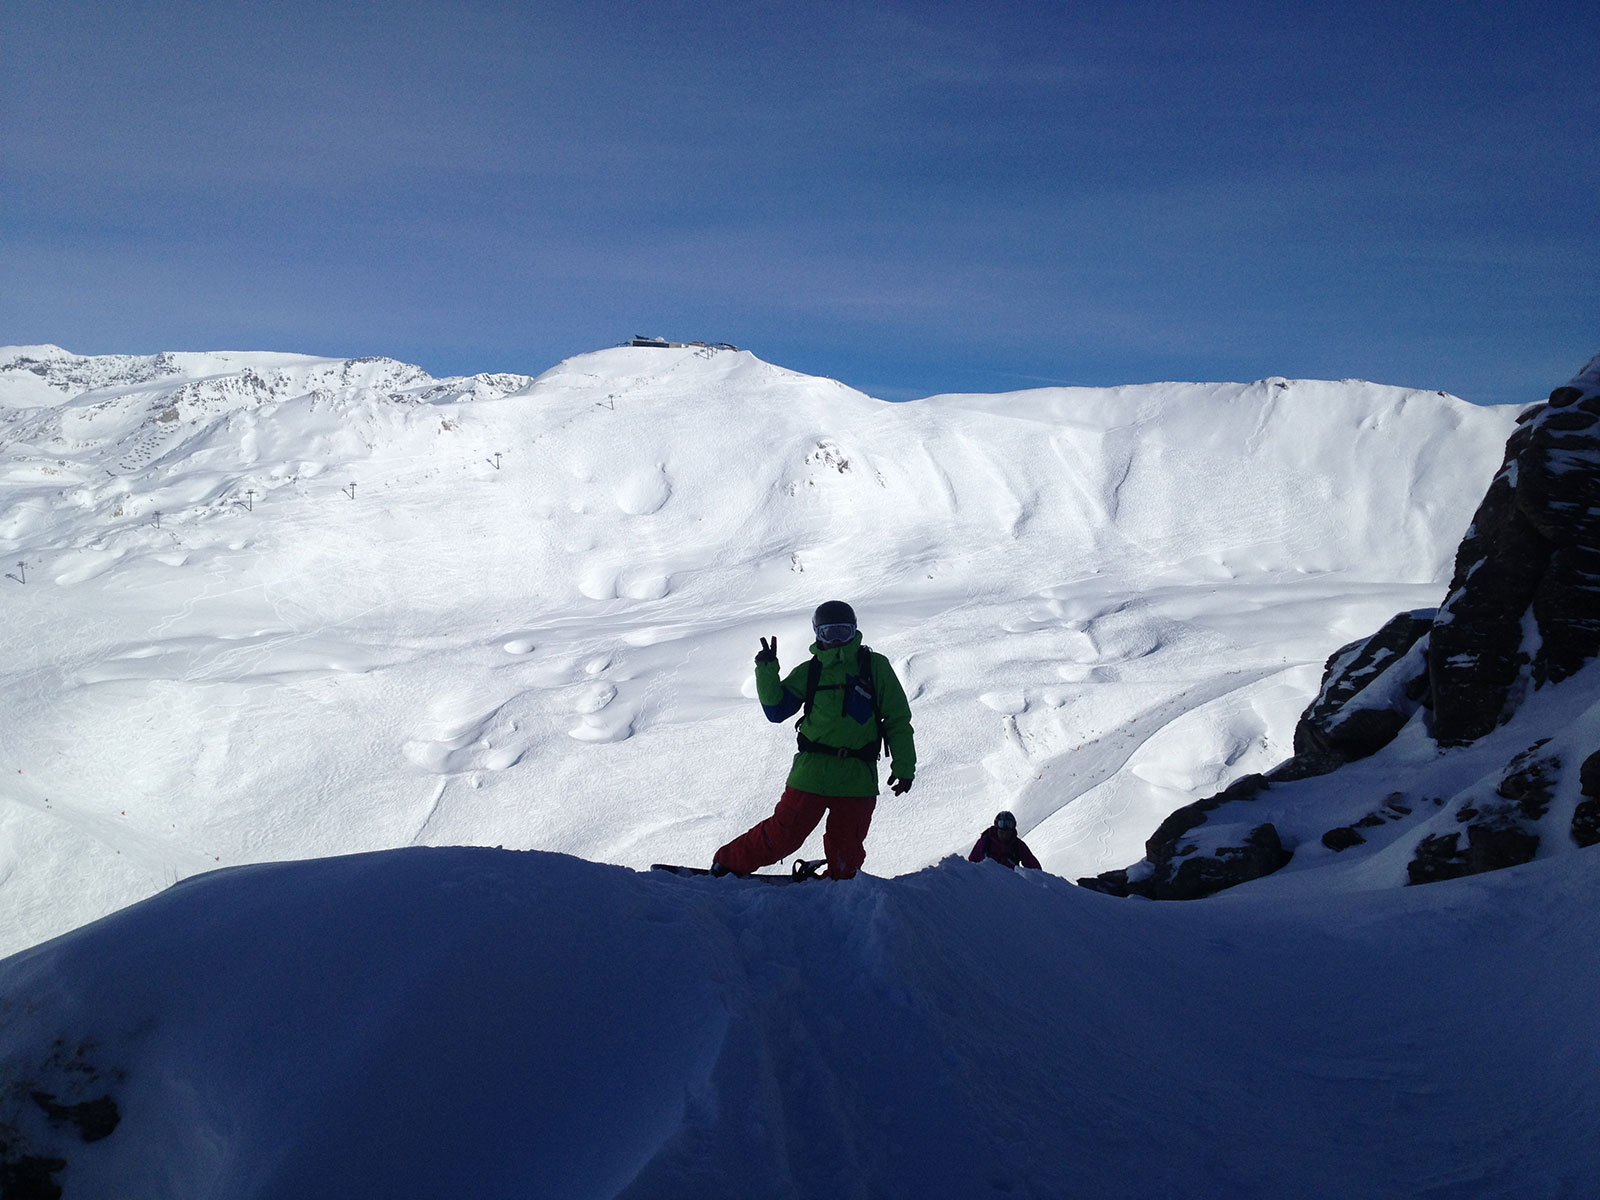 COVID-19: WHAT PROTOCOL THIS WINTER WITH SNOCOOL SKI SCHOOL?